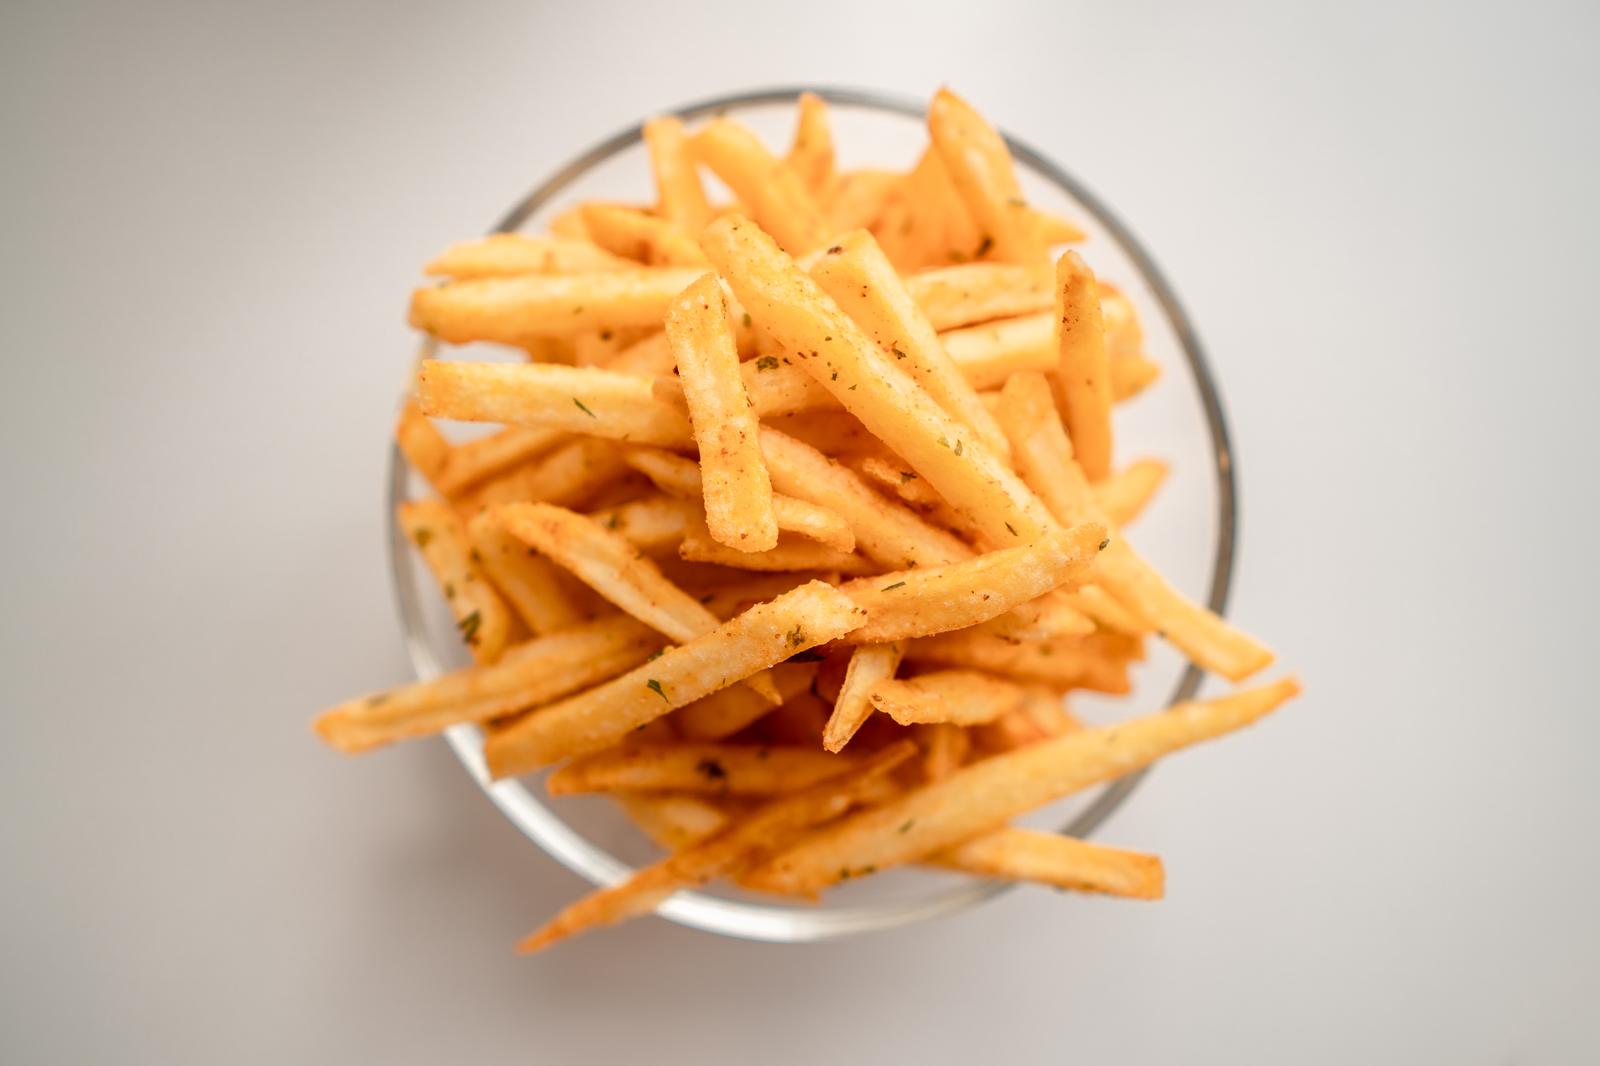 It’s Time to Find Out If You’re More Logical or Emotional With This “This or That” Game French fries